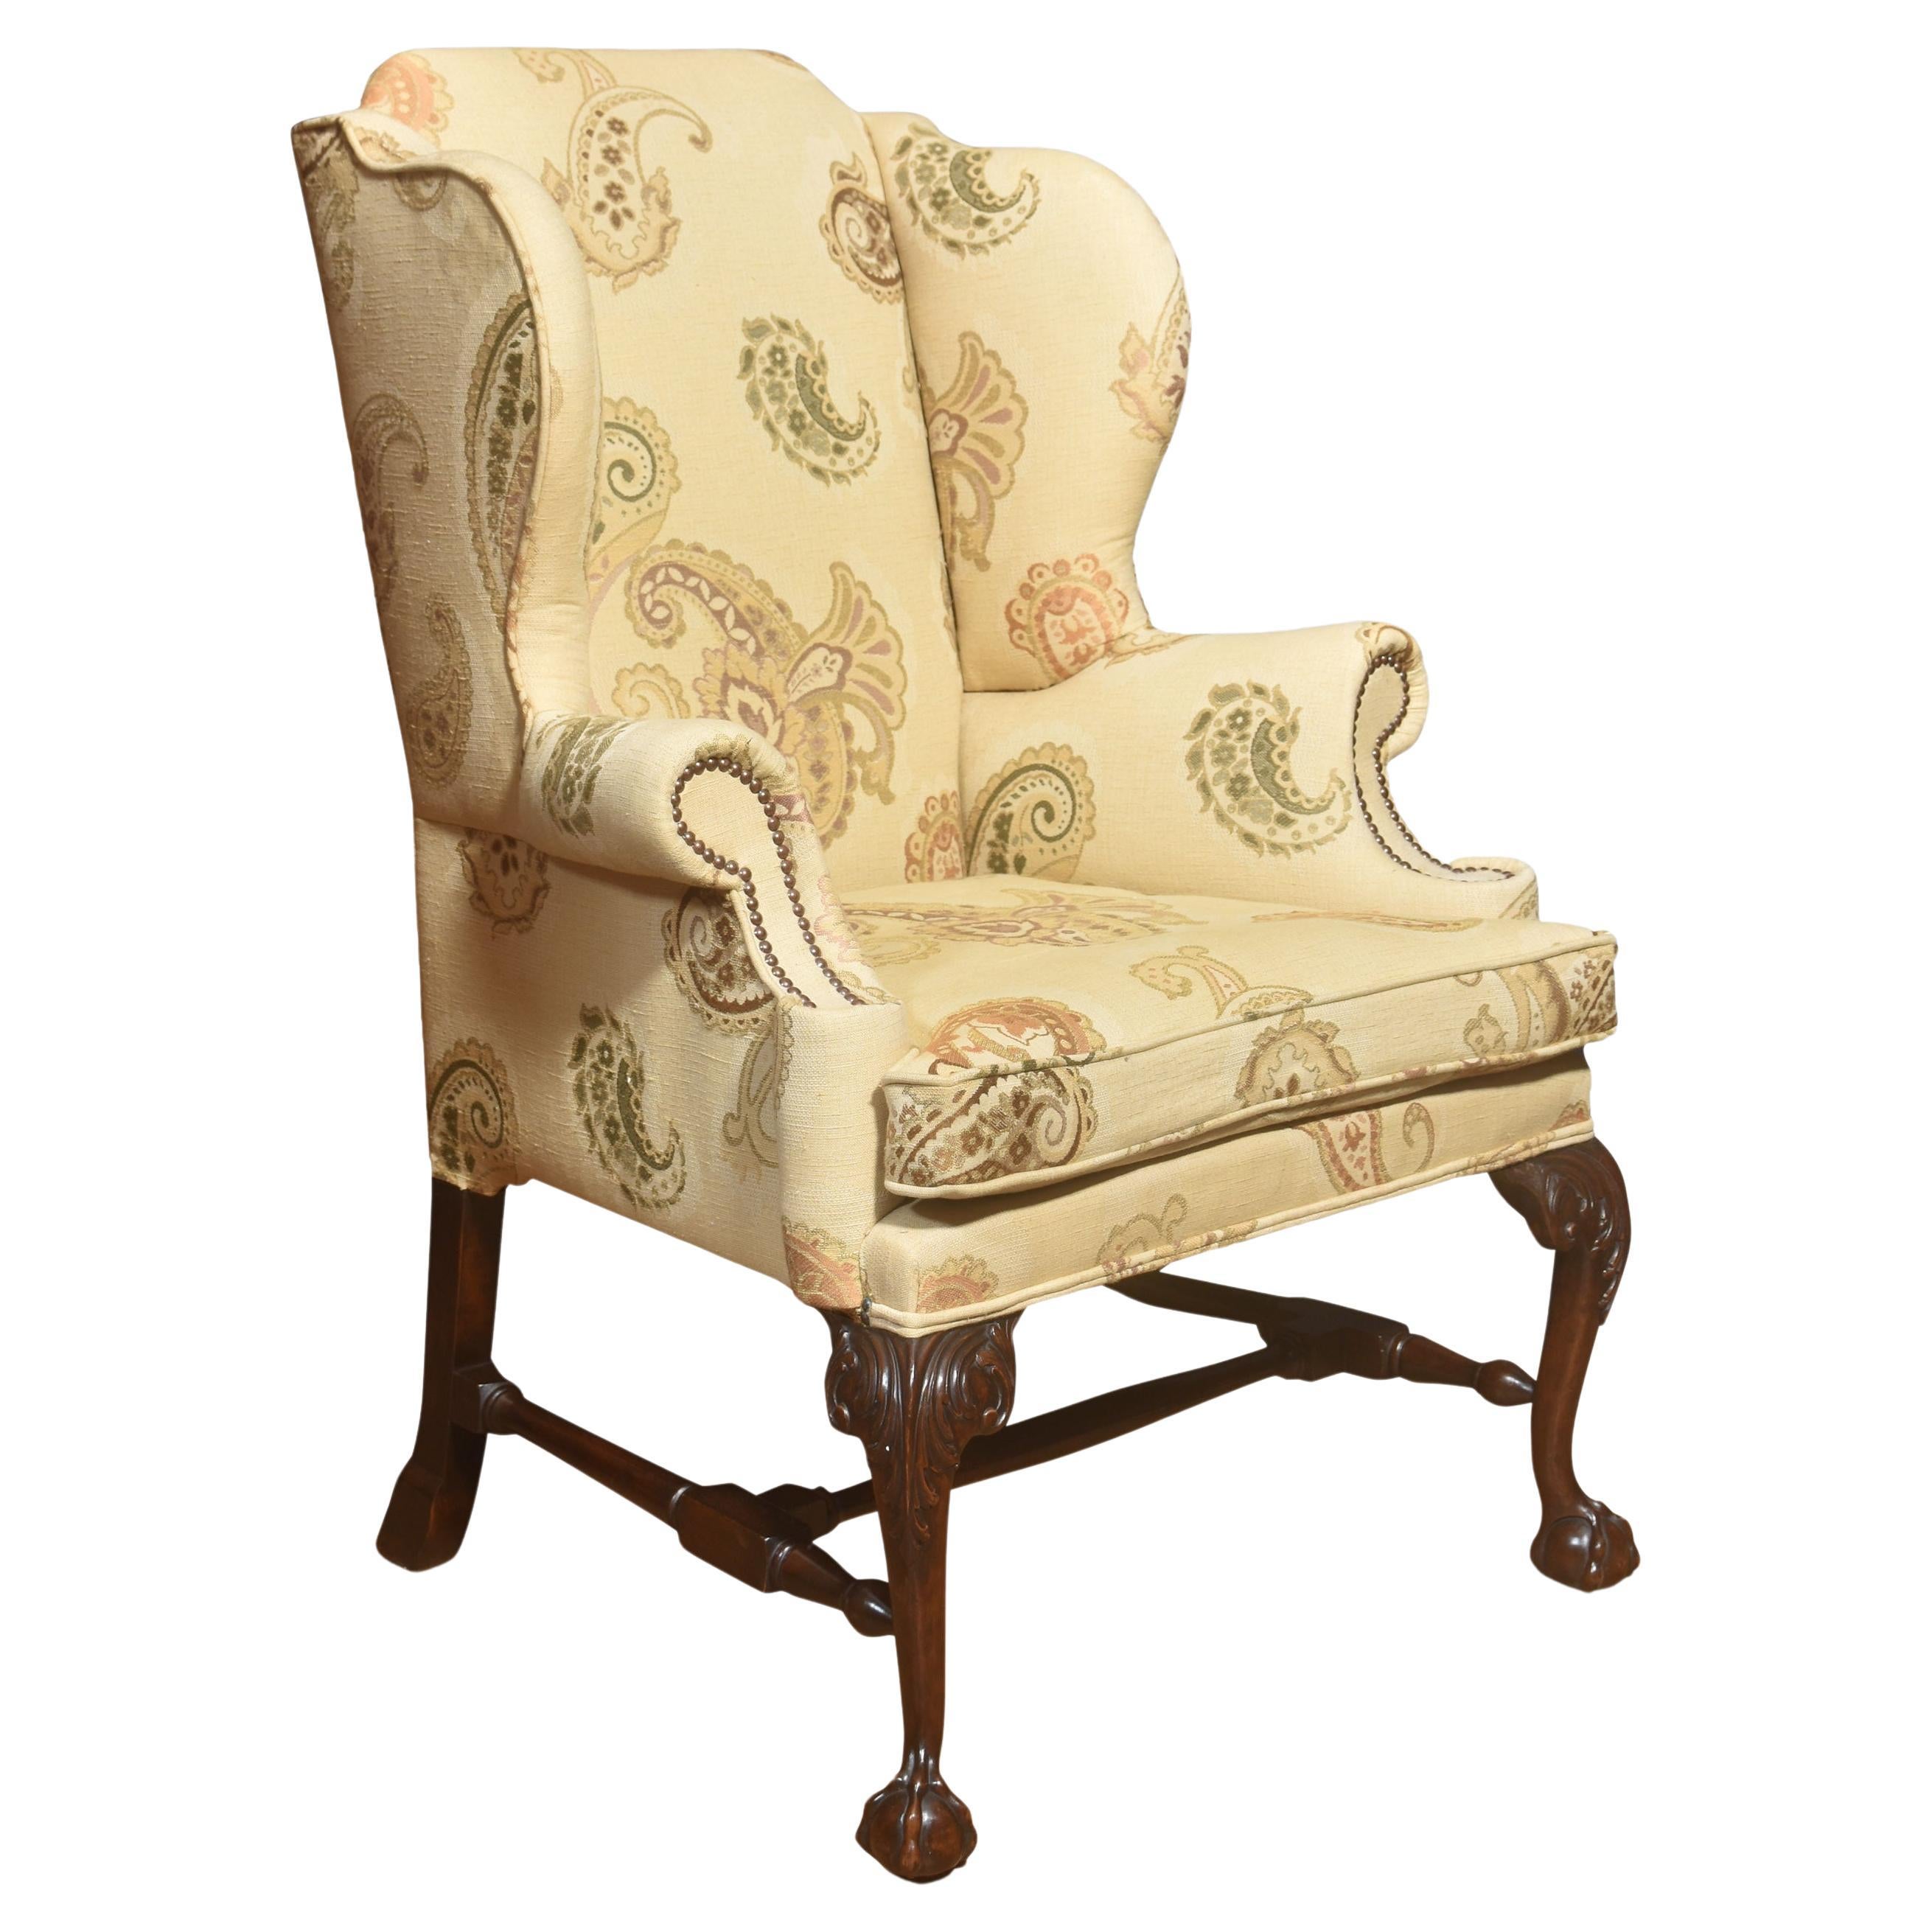 George II style wing back armchair